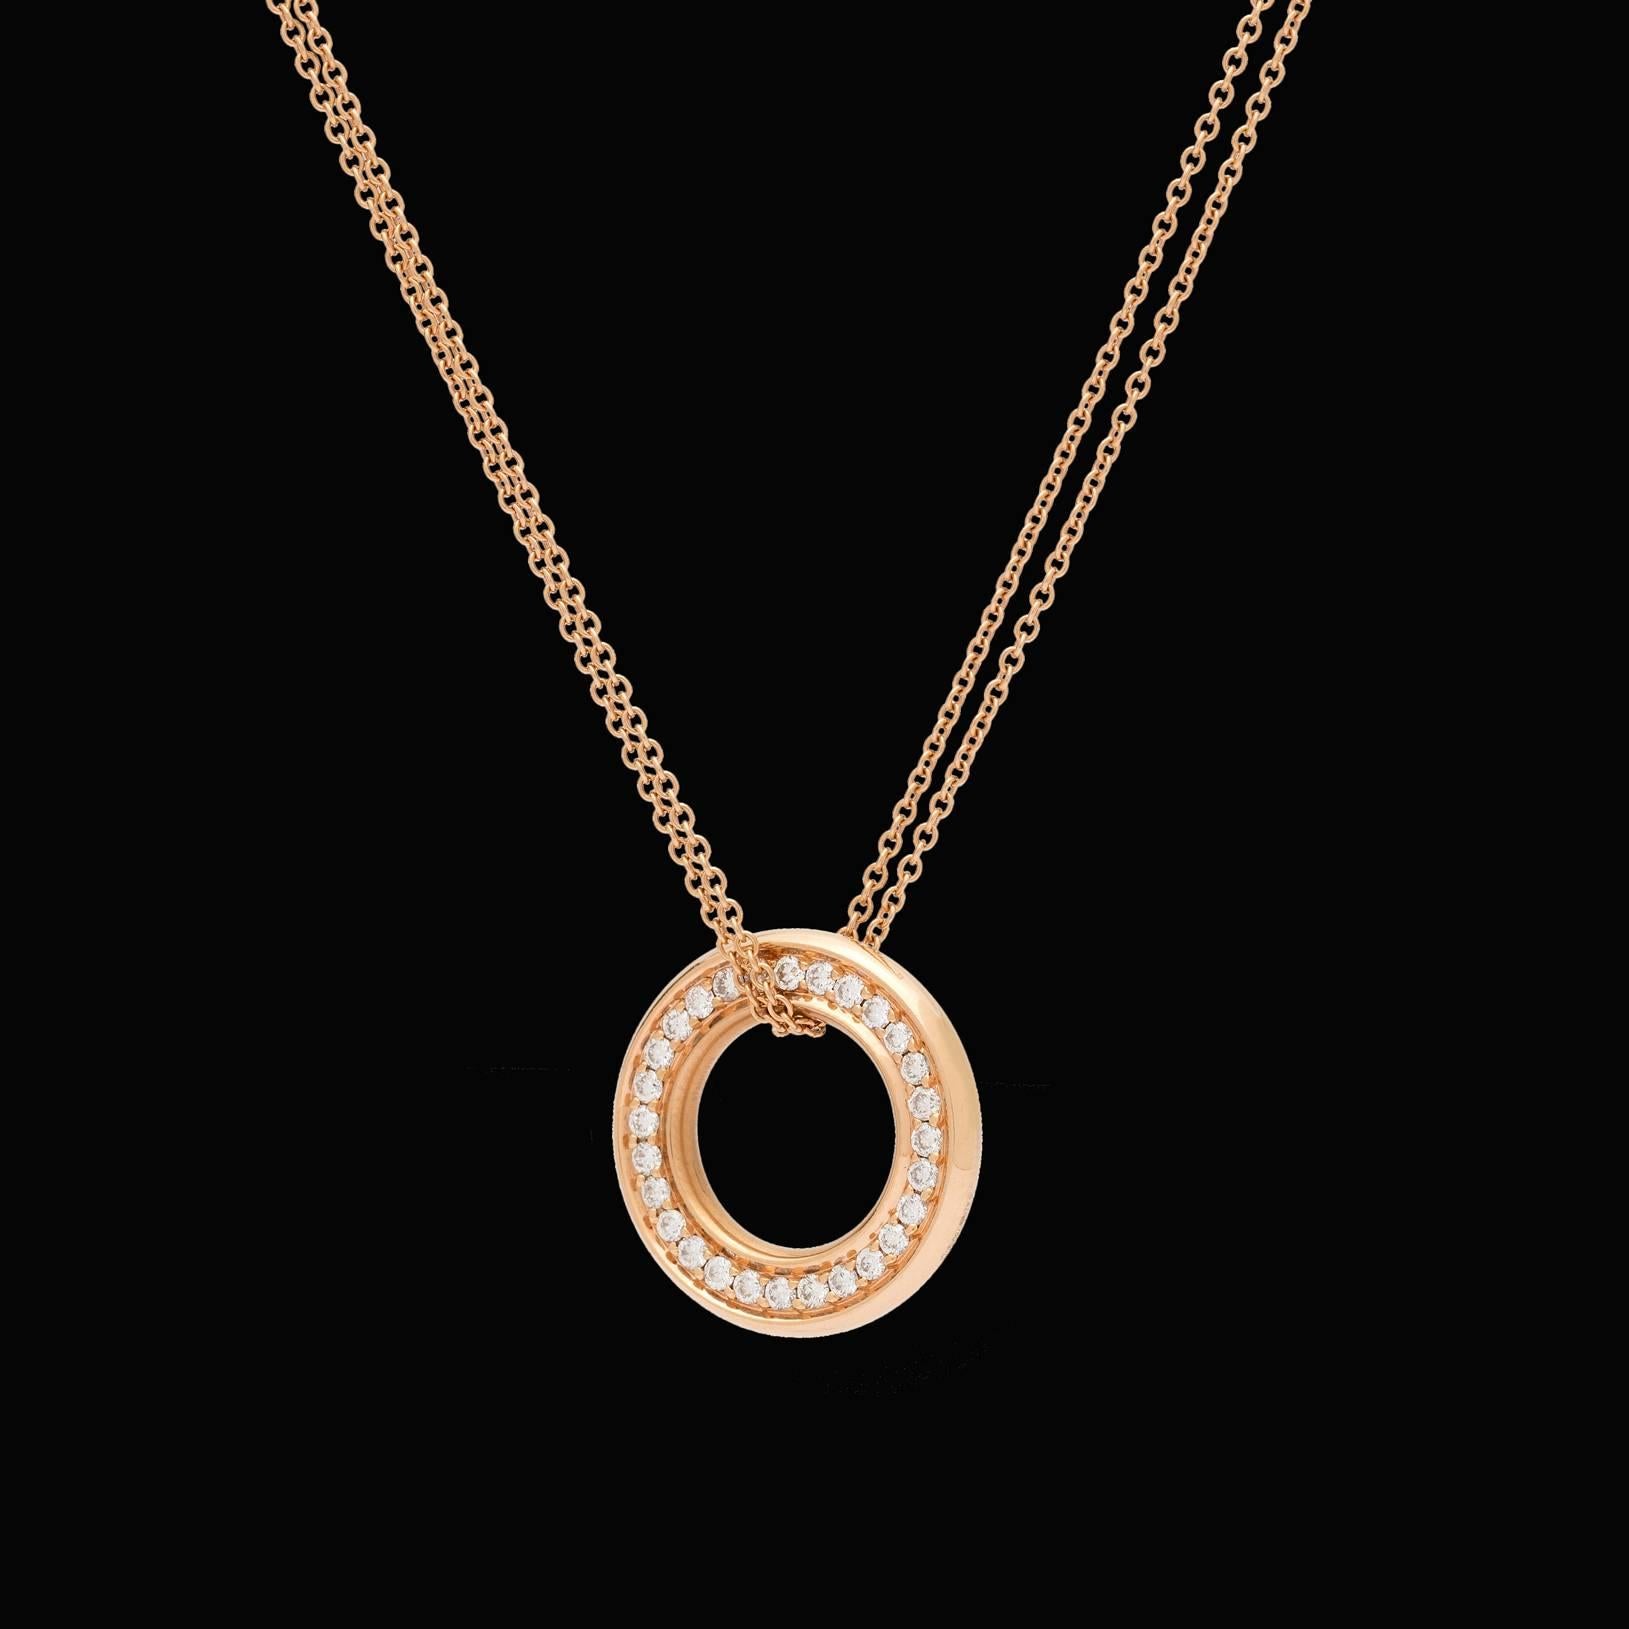 18Kt Rose Gold Boodles of London Medium Roulette Diamond Pendant with 1.12 carats of Round Brilliant Diamonds on both sides of Pendant on a double trace chain of 17 inches.  The Circle Pendant measures 0.75 inches and weighs 10.4 grams total.